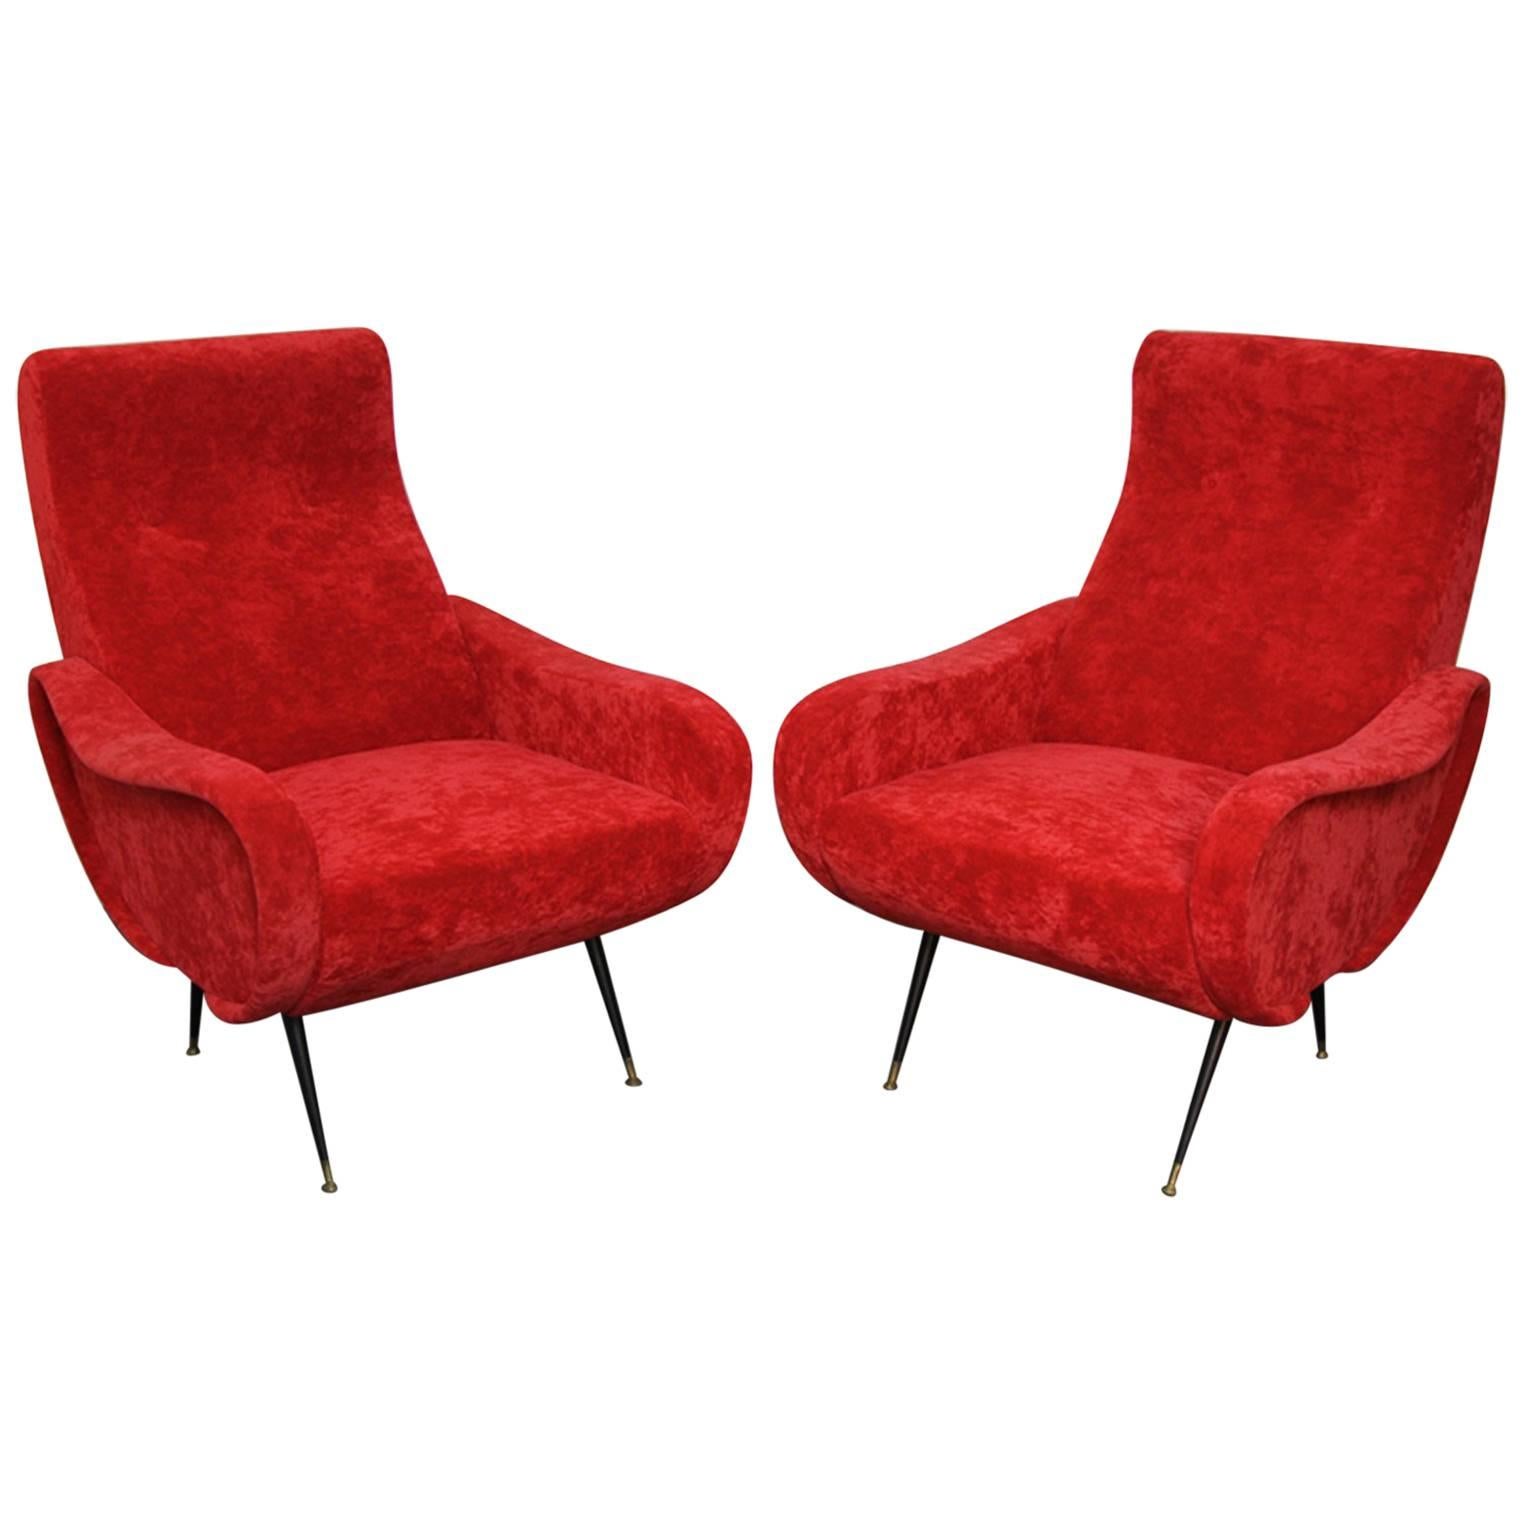 Pair of Italian Style Upholstered Club Chairs in Red Velvet